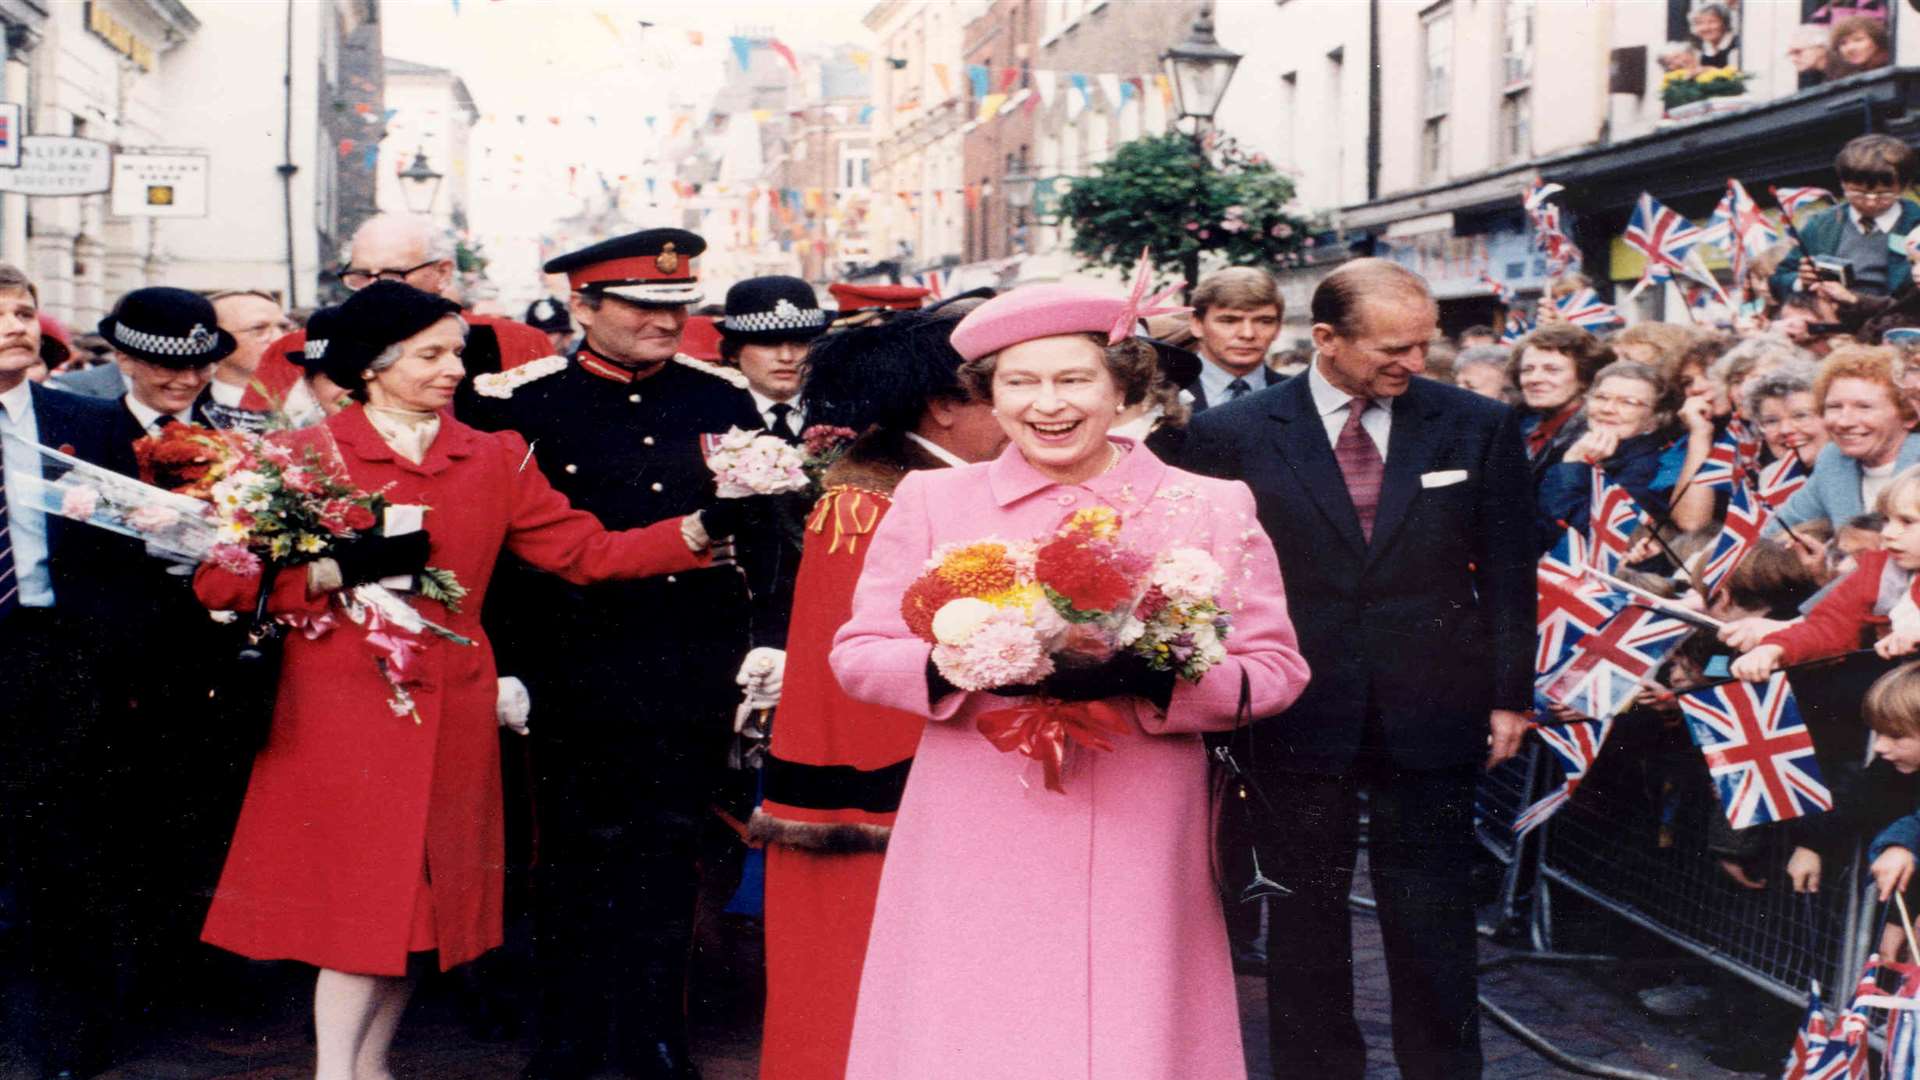 The Queen delighted the crowds in Rochester High Street during a tour of the Medway Towns in 1984